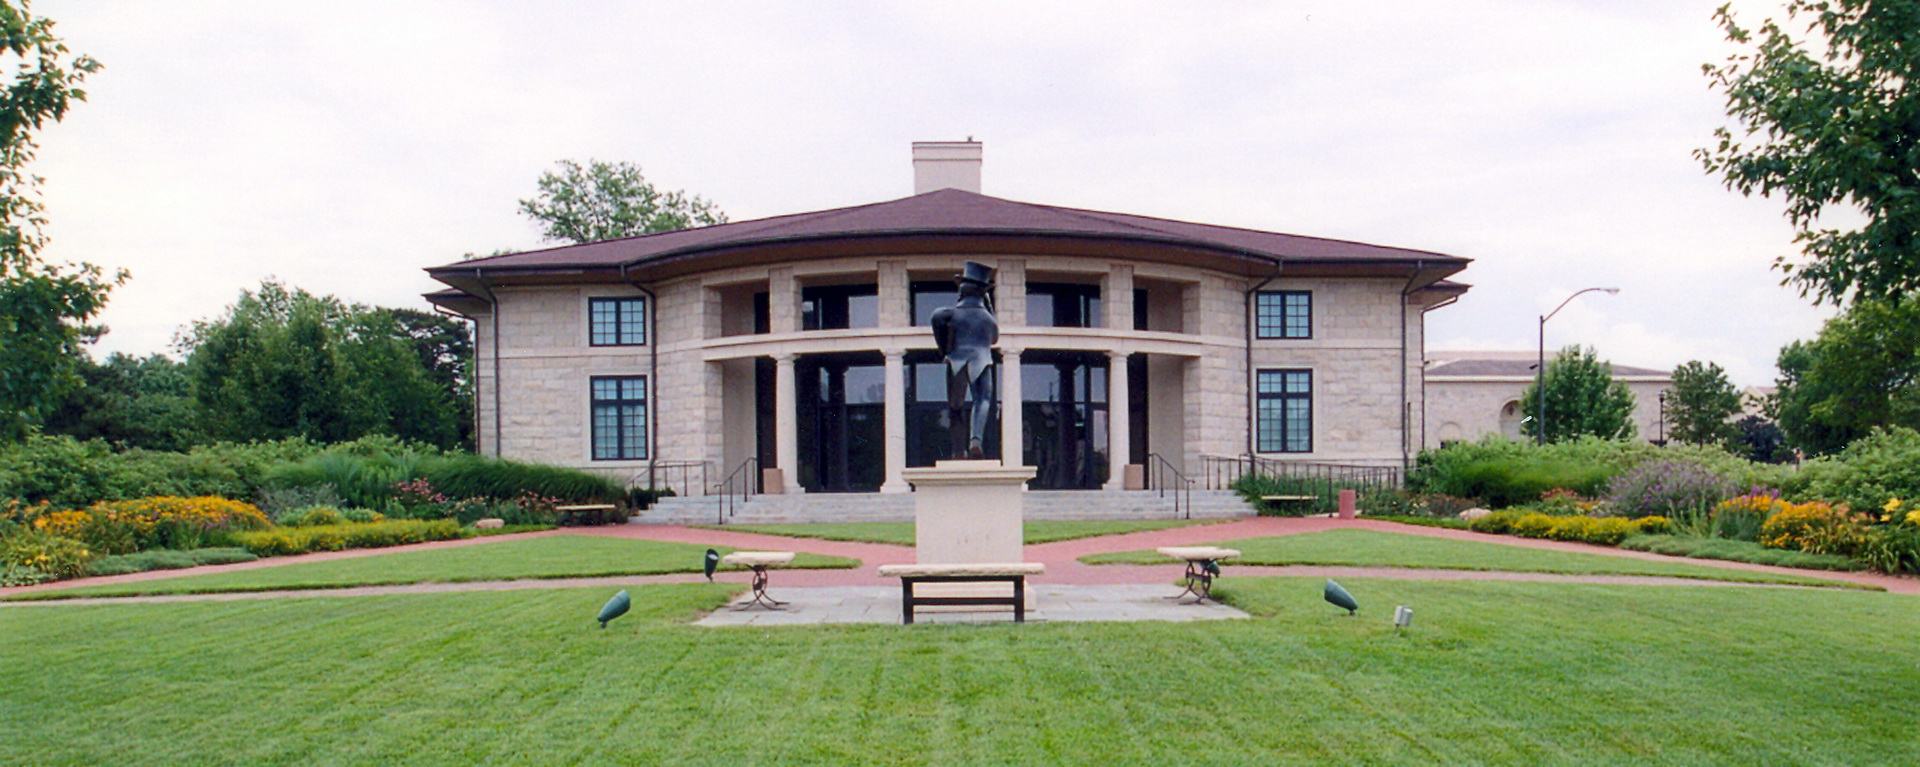 building on washburn's campus